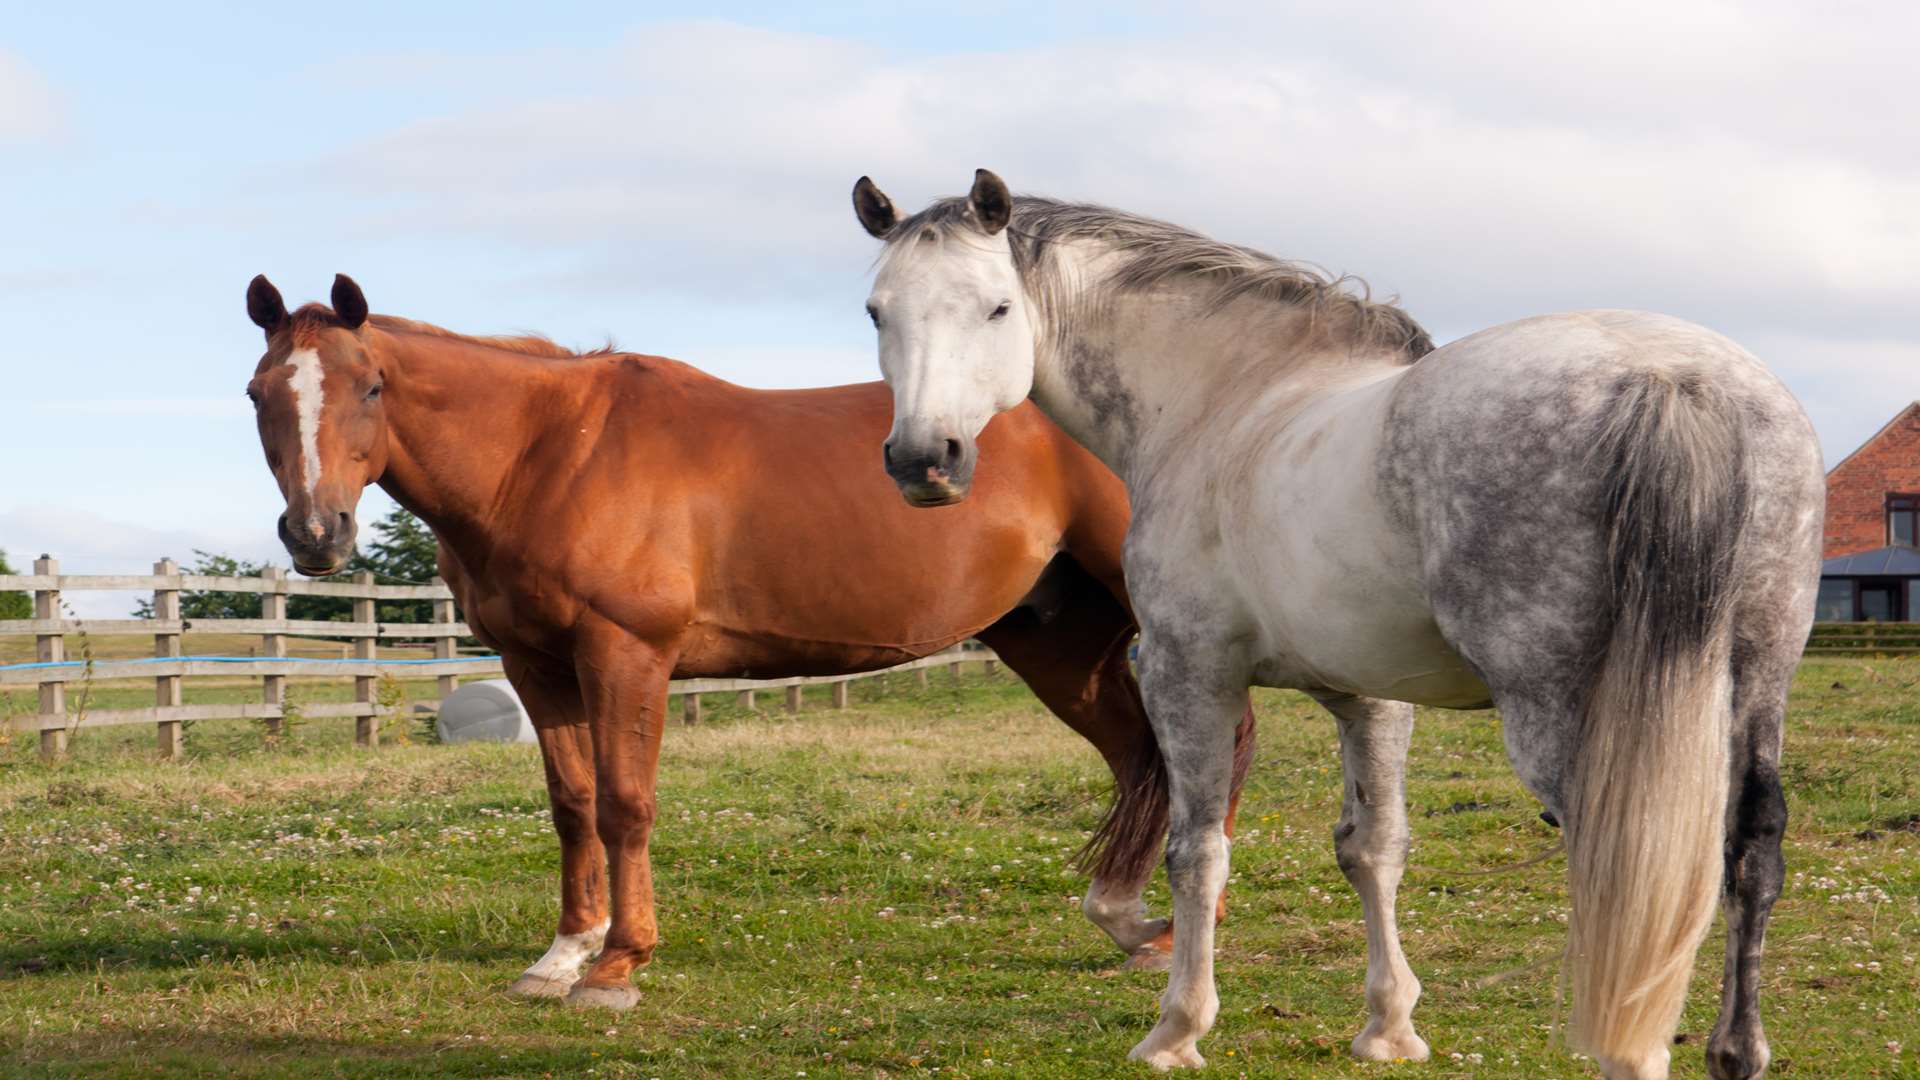 Horses in a paddock. Eileen Groome/Getty Images/iStockphoto